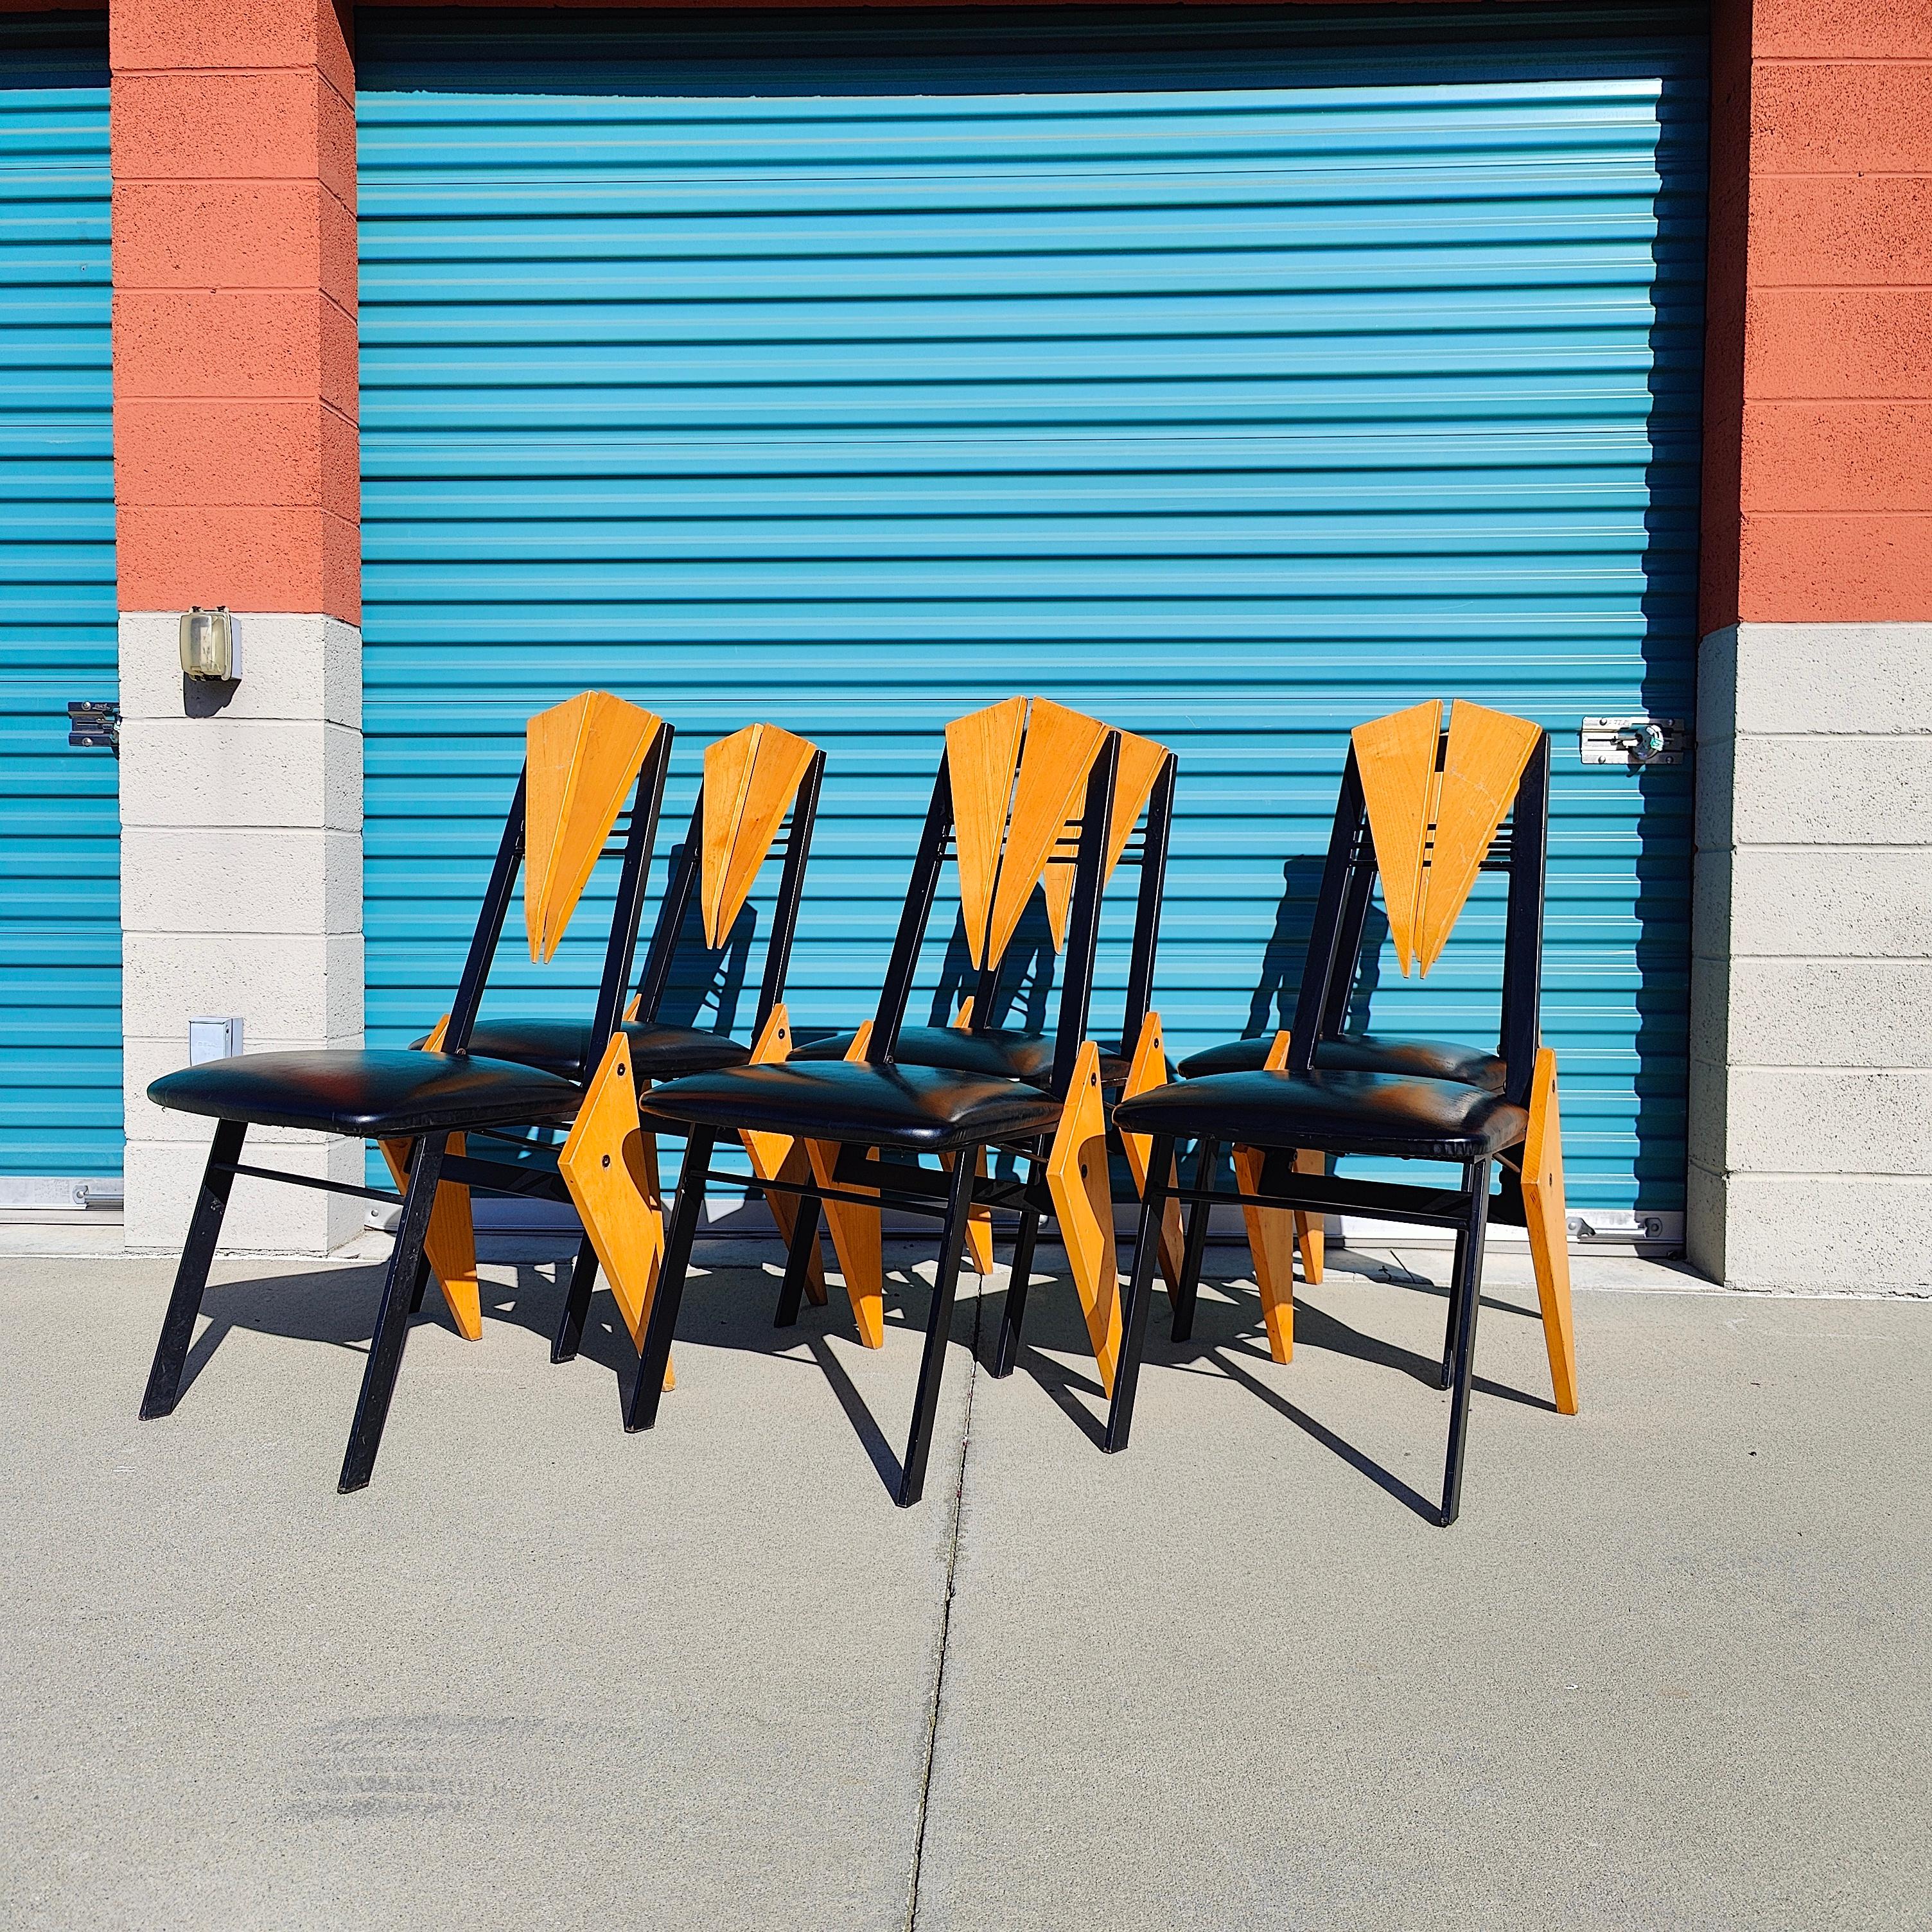 6 Abstract/Memphis chairs now available. They feature triangle wood back rest and legs that are geometrically pleasing to the eye. Frames are made out of metal with nice amount of patina for that vintage look. Funky look overall! Very fun